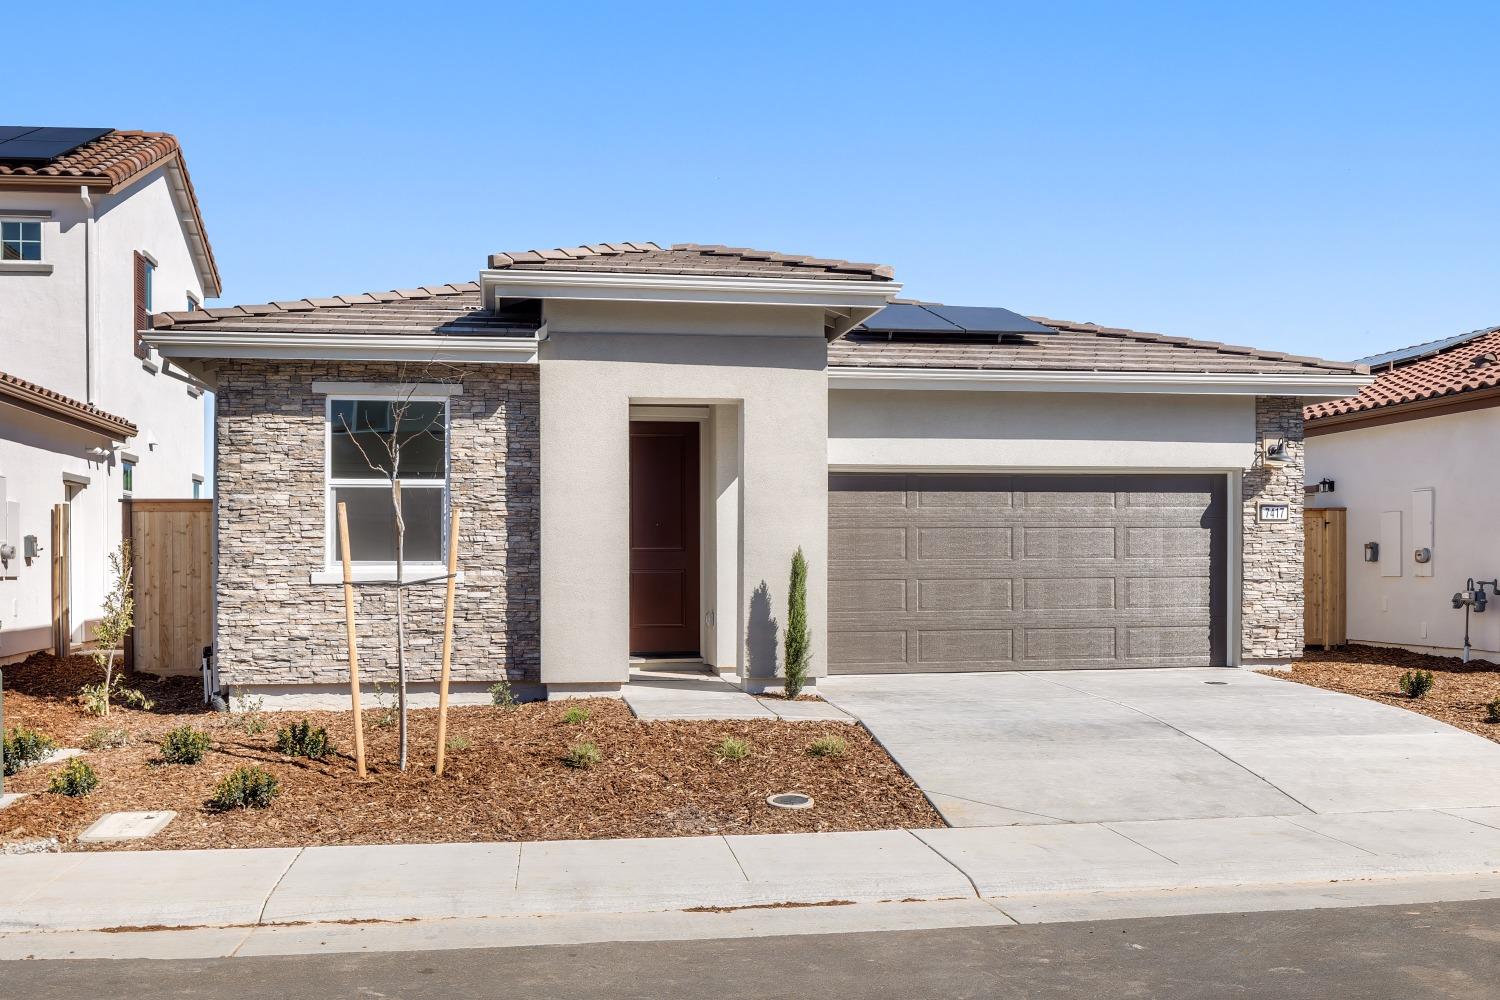 Photo of 7417 Moon Dream Wy in Roseville, CA